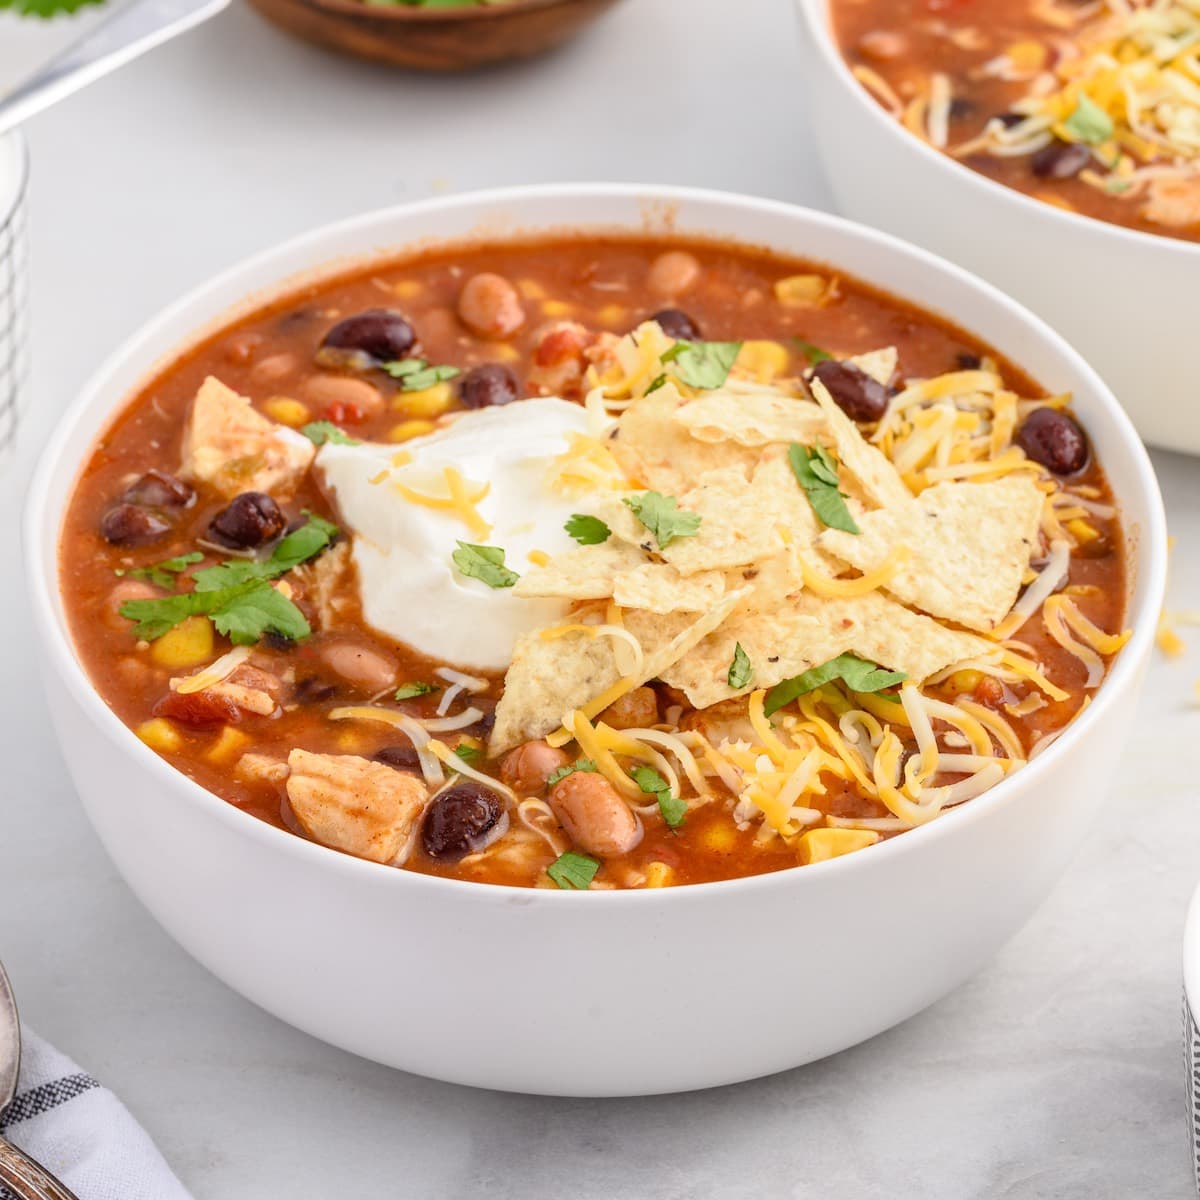 Easy 7 Can Taco Soup and Soup Bar - My Turn for Us